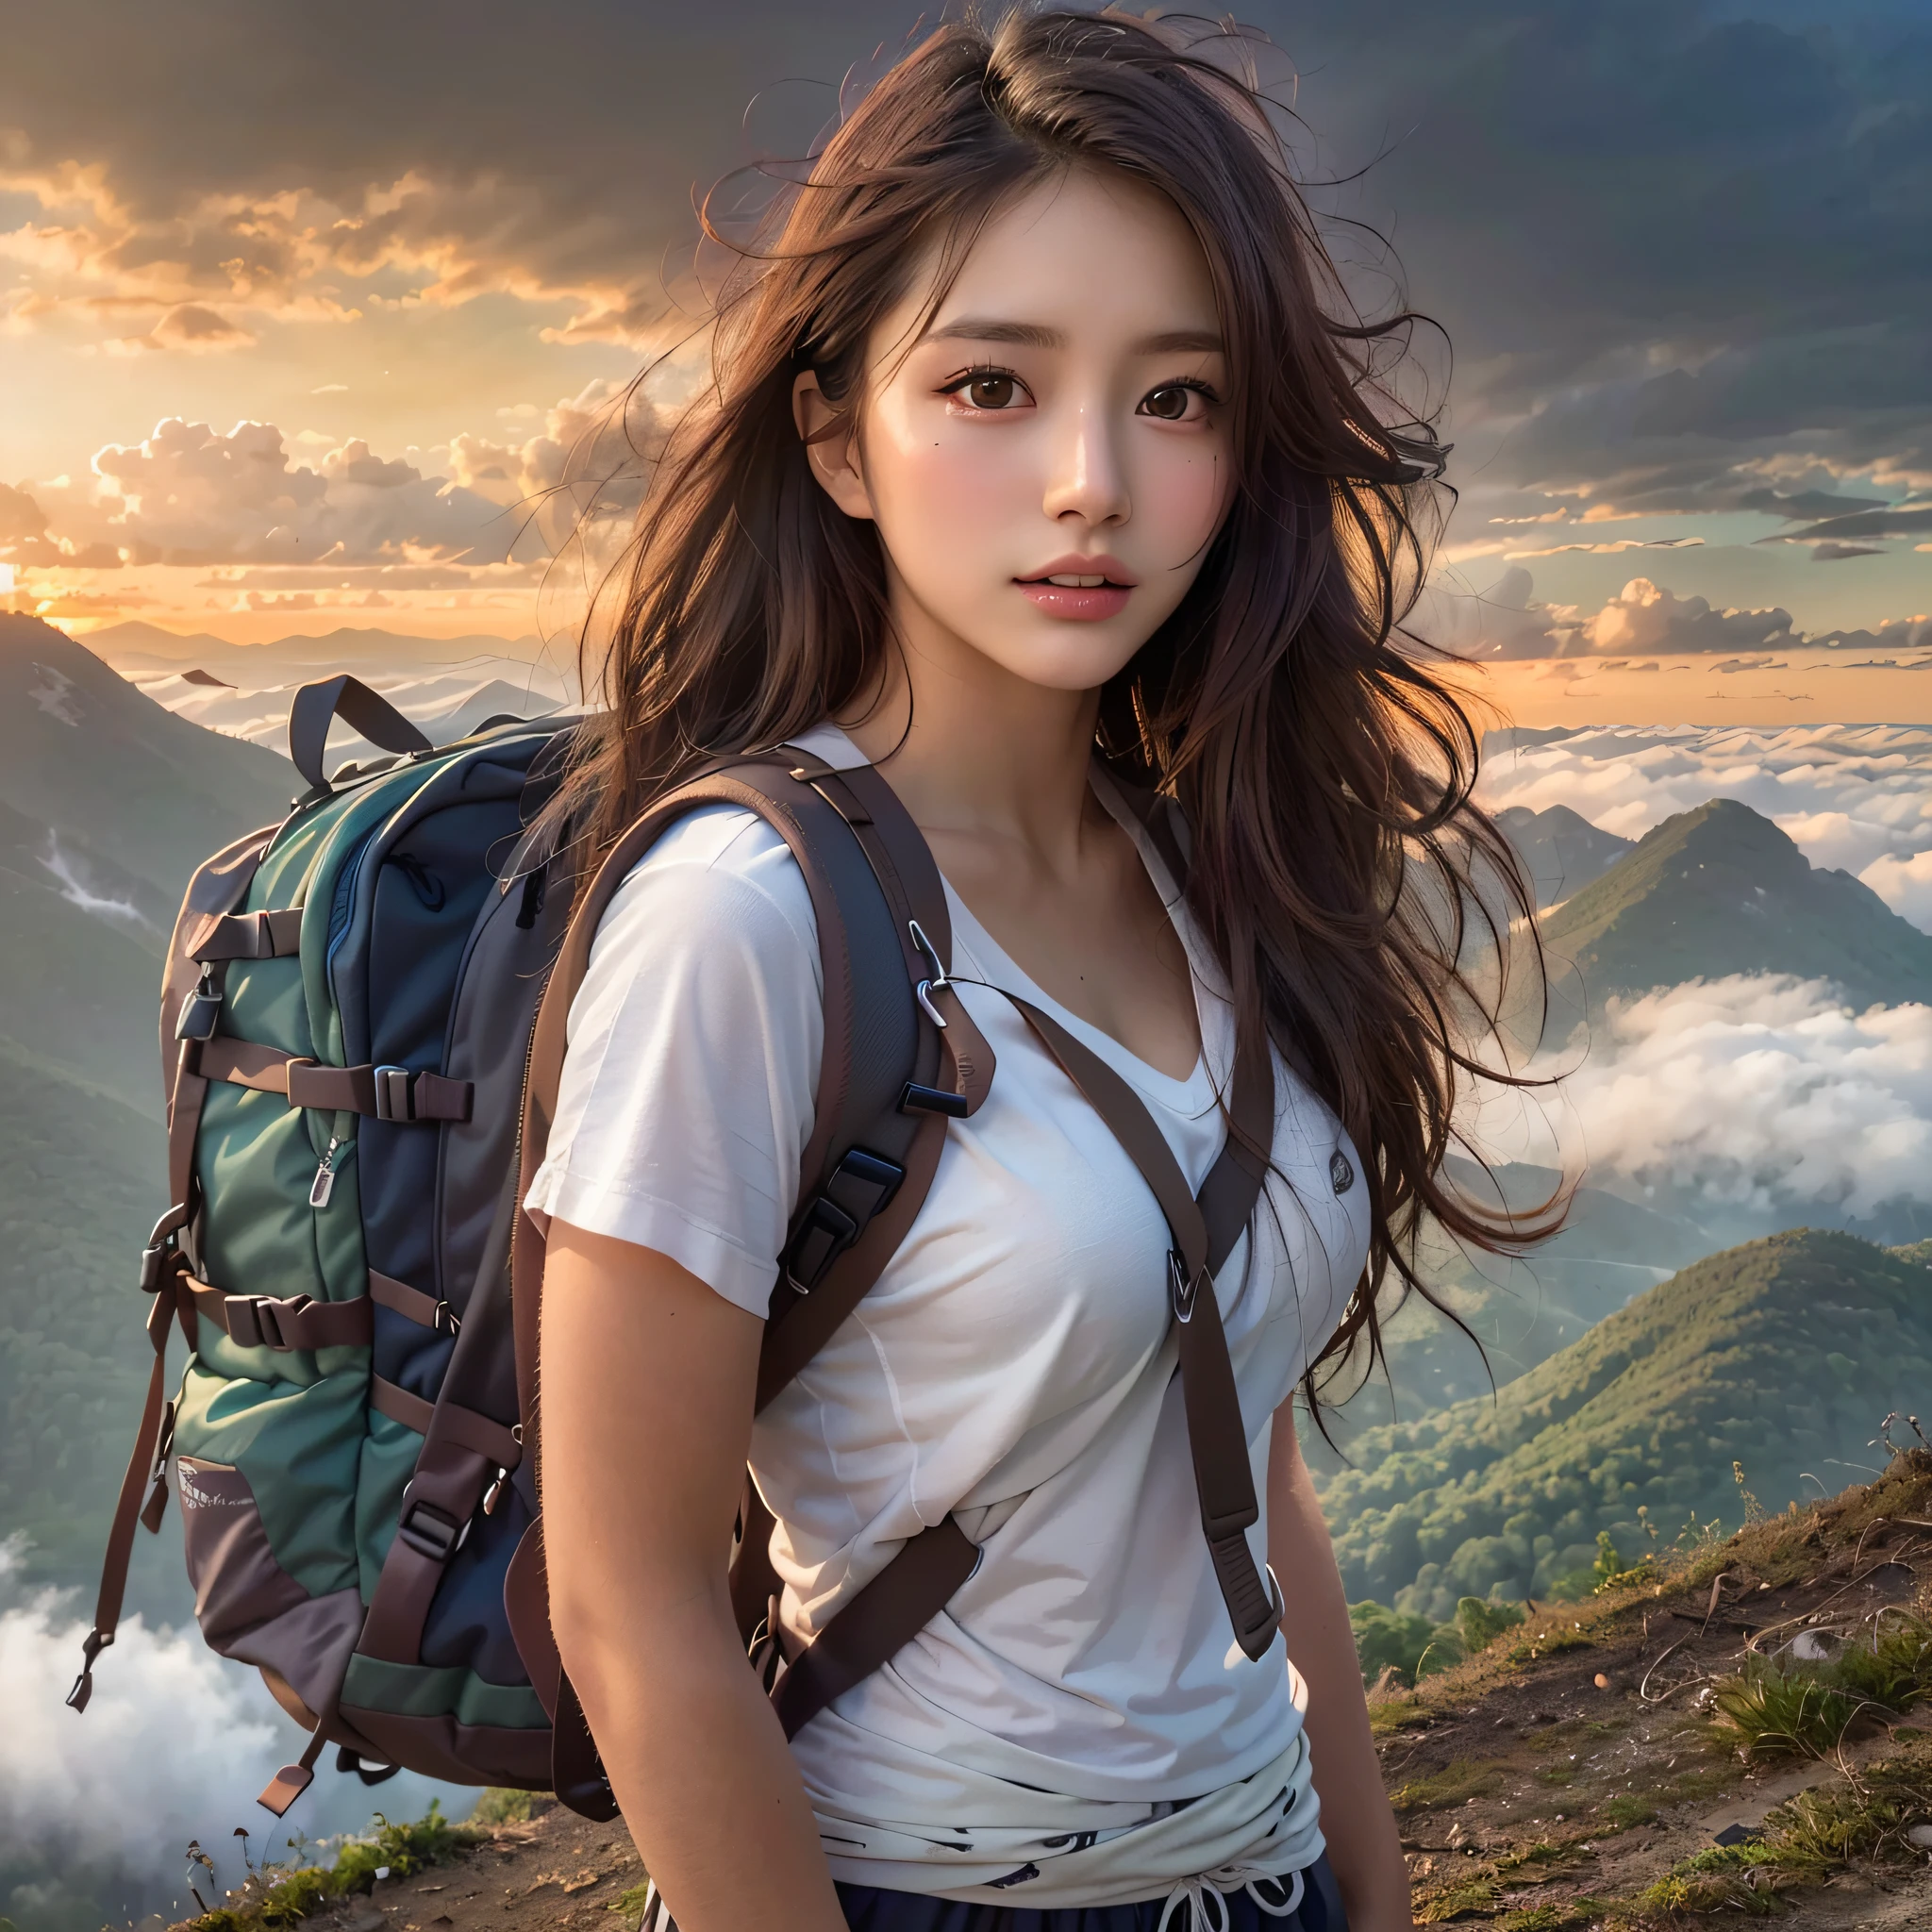 (Naturescape photography), (best quality), masterpiece:1.2, ultra high res, photorealistic:1.4, RAW photo, (Magnificent mountain, sea of clouds), (On a very high mountain peak), (sunset), (wideangle shot),  (Show cleavage:0.8),
(1girl), (Photo from the knee up:1.3), (18 years old), (smile:0.9), (shiny skin), (semi-long hair, dark brown hair), 
(Large white V-neck T-shirt, Trekking shorts), (Carrying a large backpack), 
(ultra detailed face), (ultra Beautiful fece), (ultra detailed eyes), (ultra detailed nose), (ultra detailed mouth), (ultra detailed arms), (ultra detailed body), pan focus, looking at the audience, (Show cleavage)